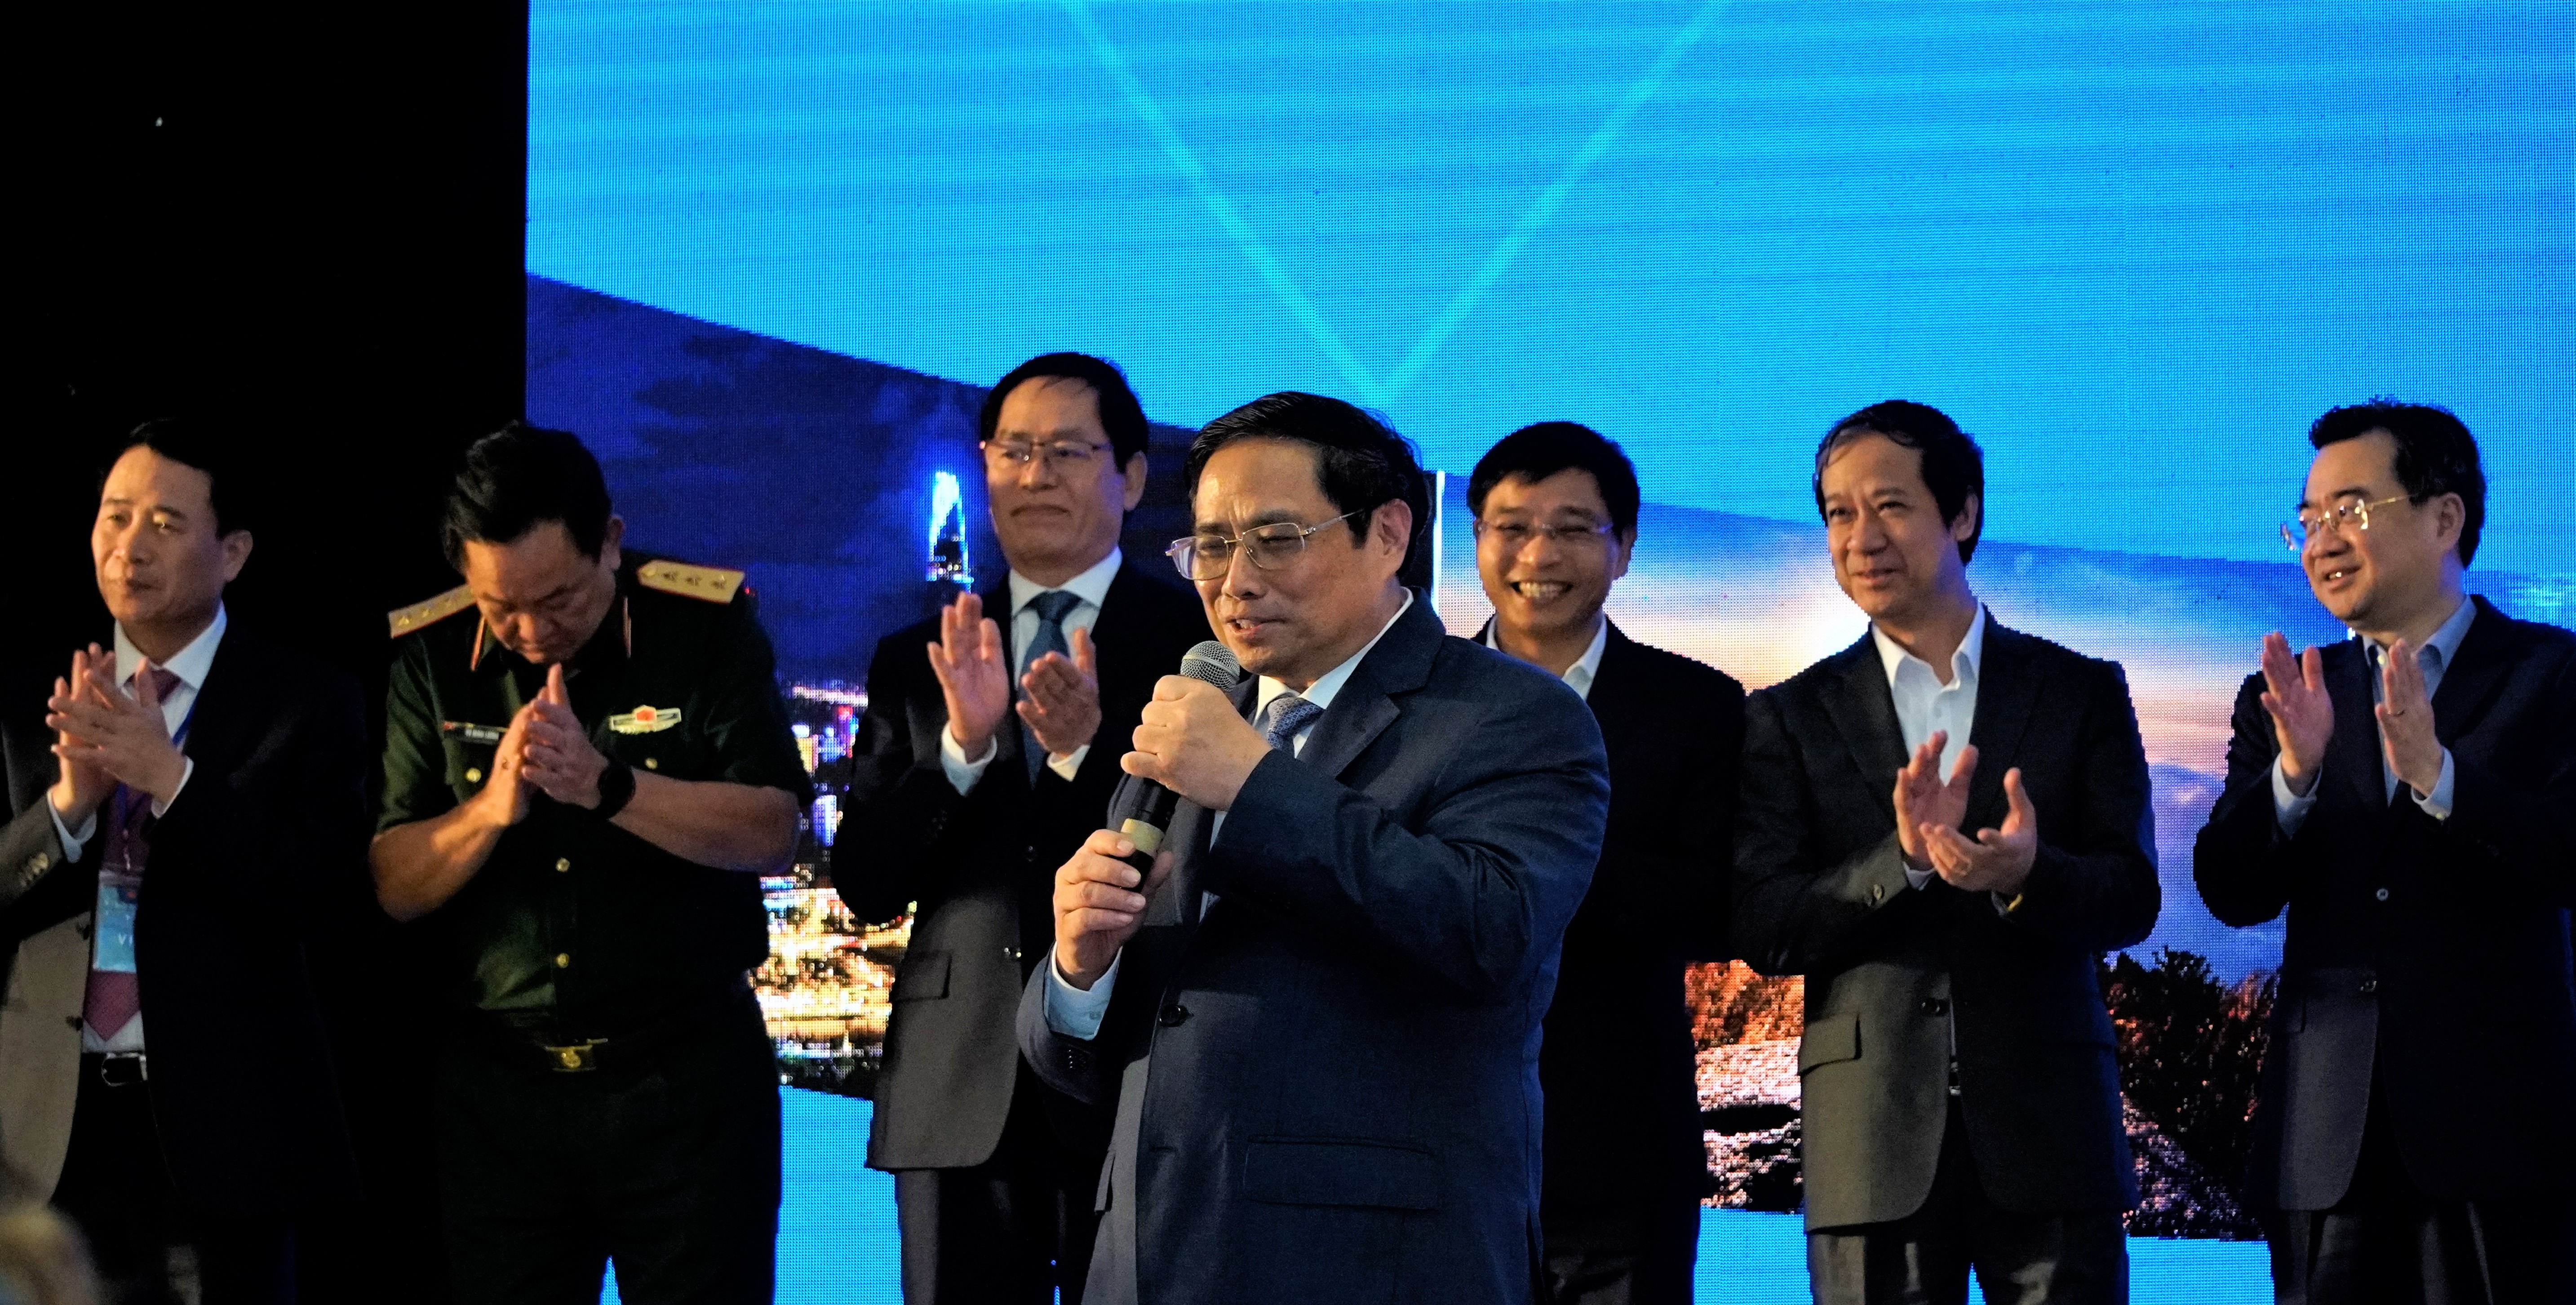 Ba Ria - Vung Tau awarded Investment Certificates and Memorandum of Understanding on Investment for 10 projects